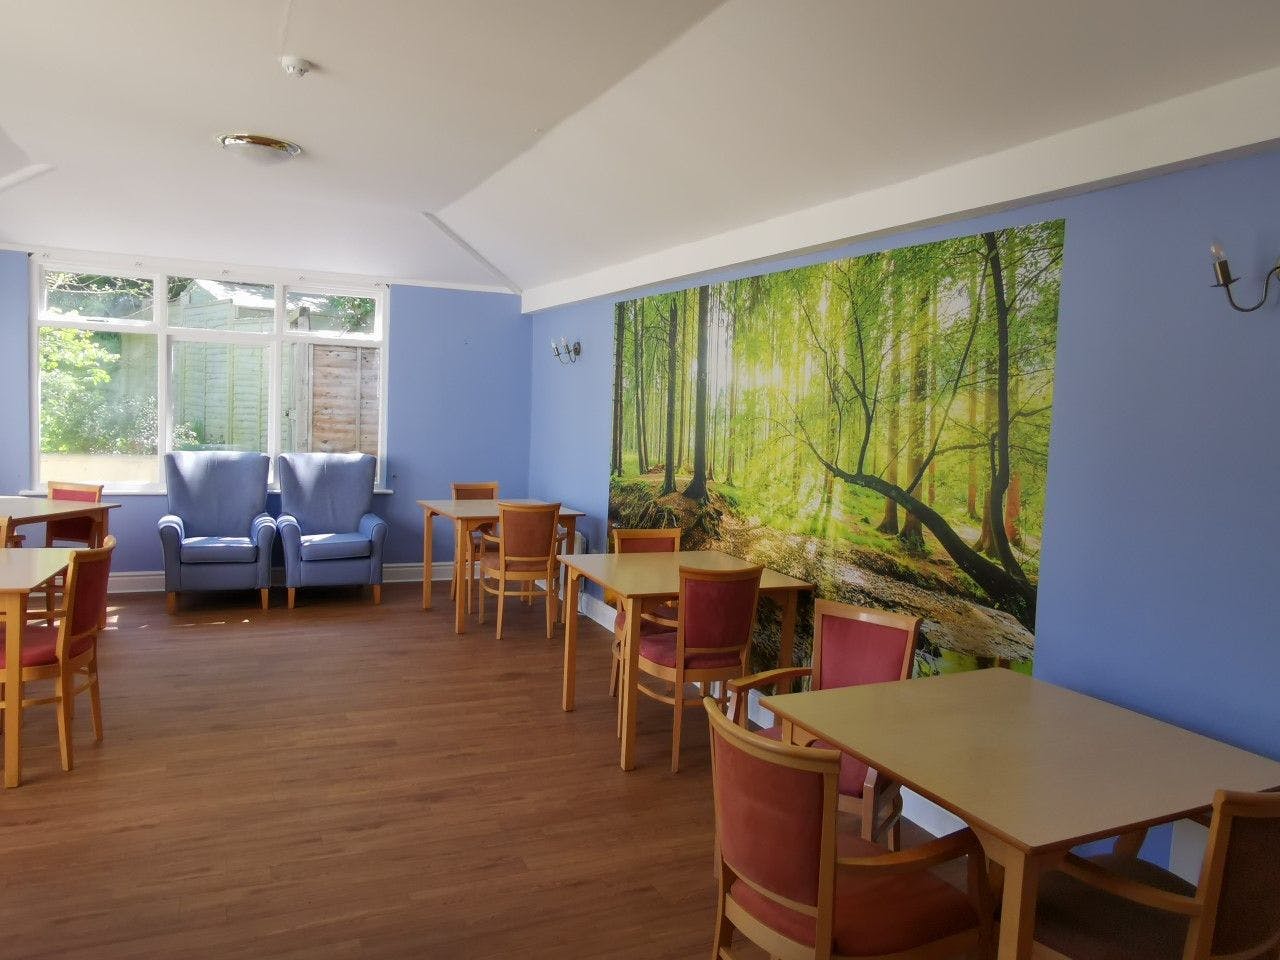 Castle House Group - Coxwell Hall of Faringdon care home 002